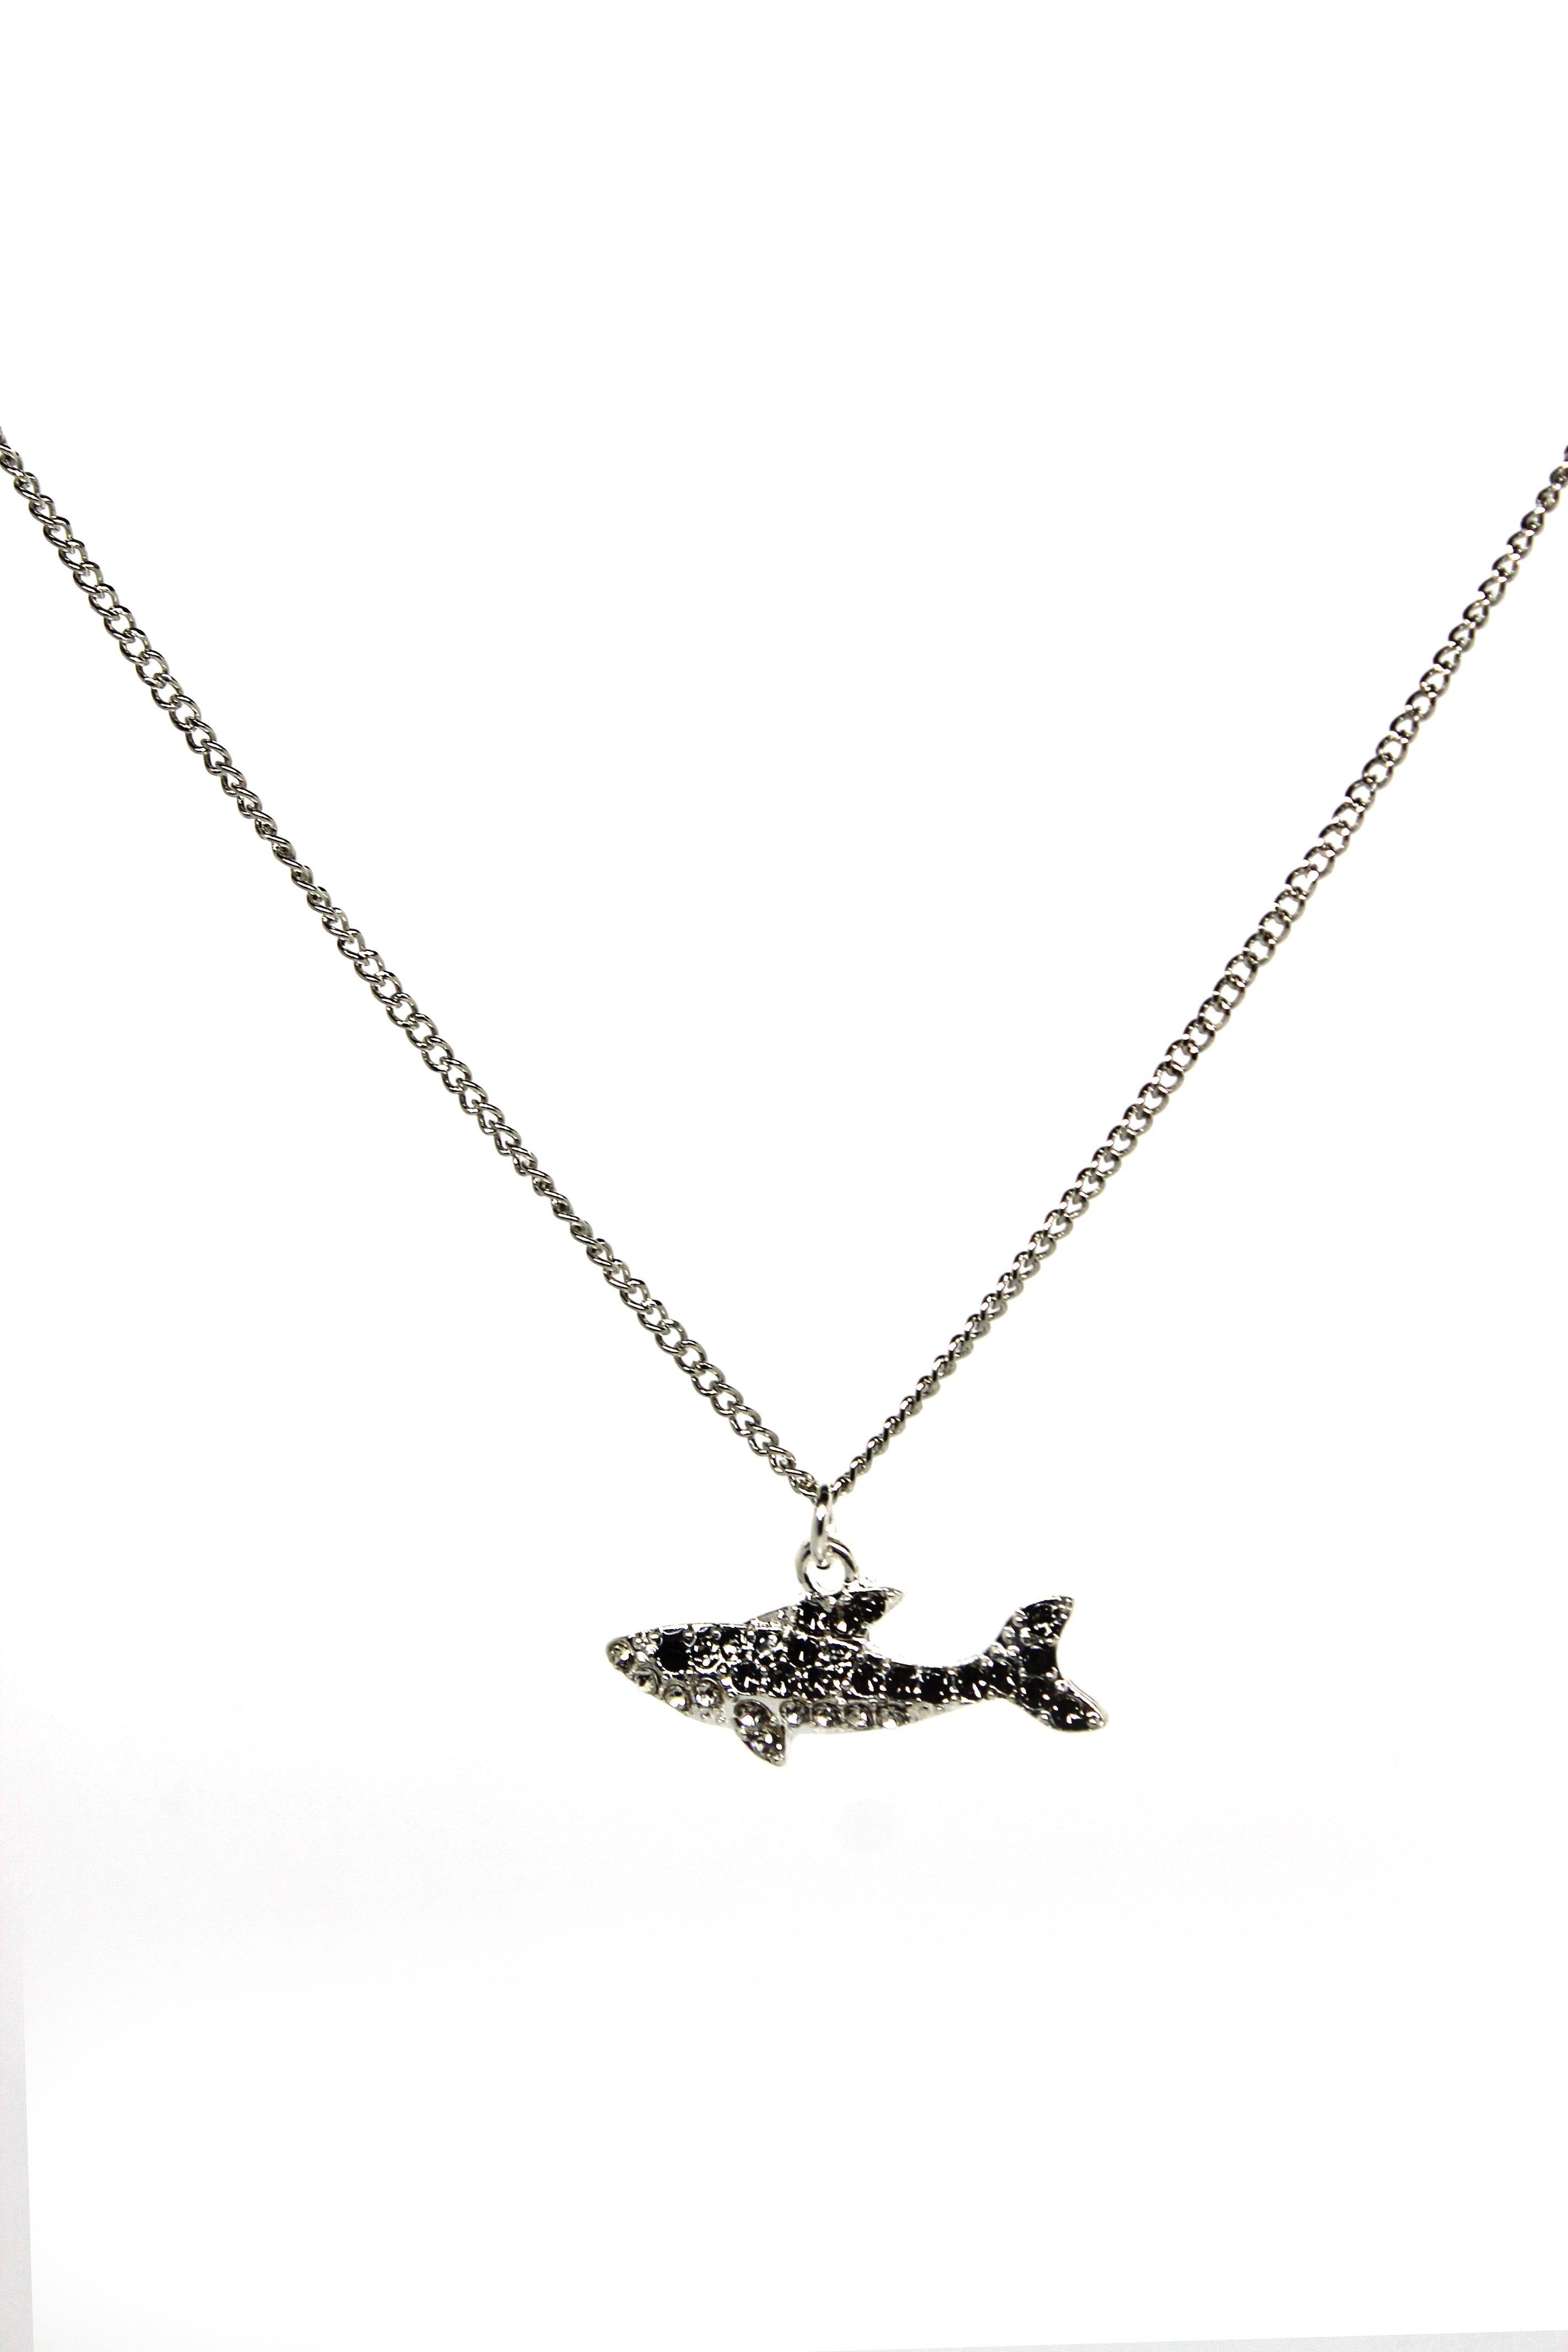 Shark Grey Necklace - Wildtouch - Wildtouch